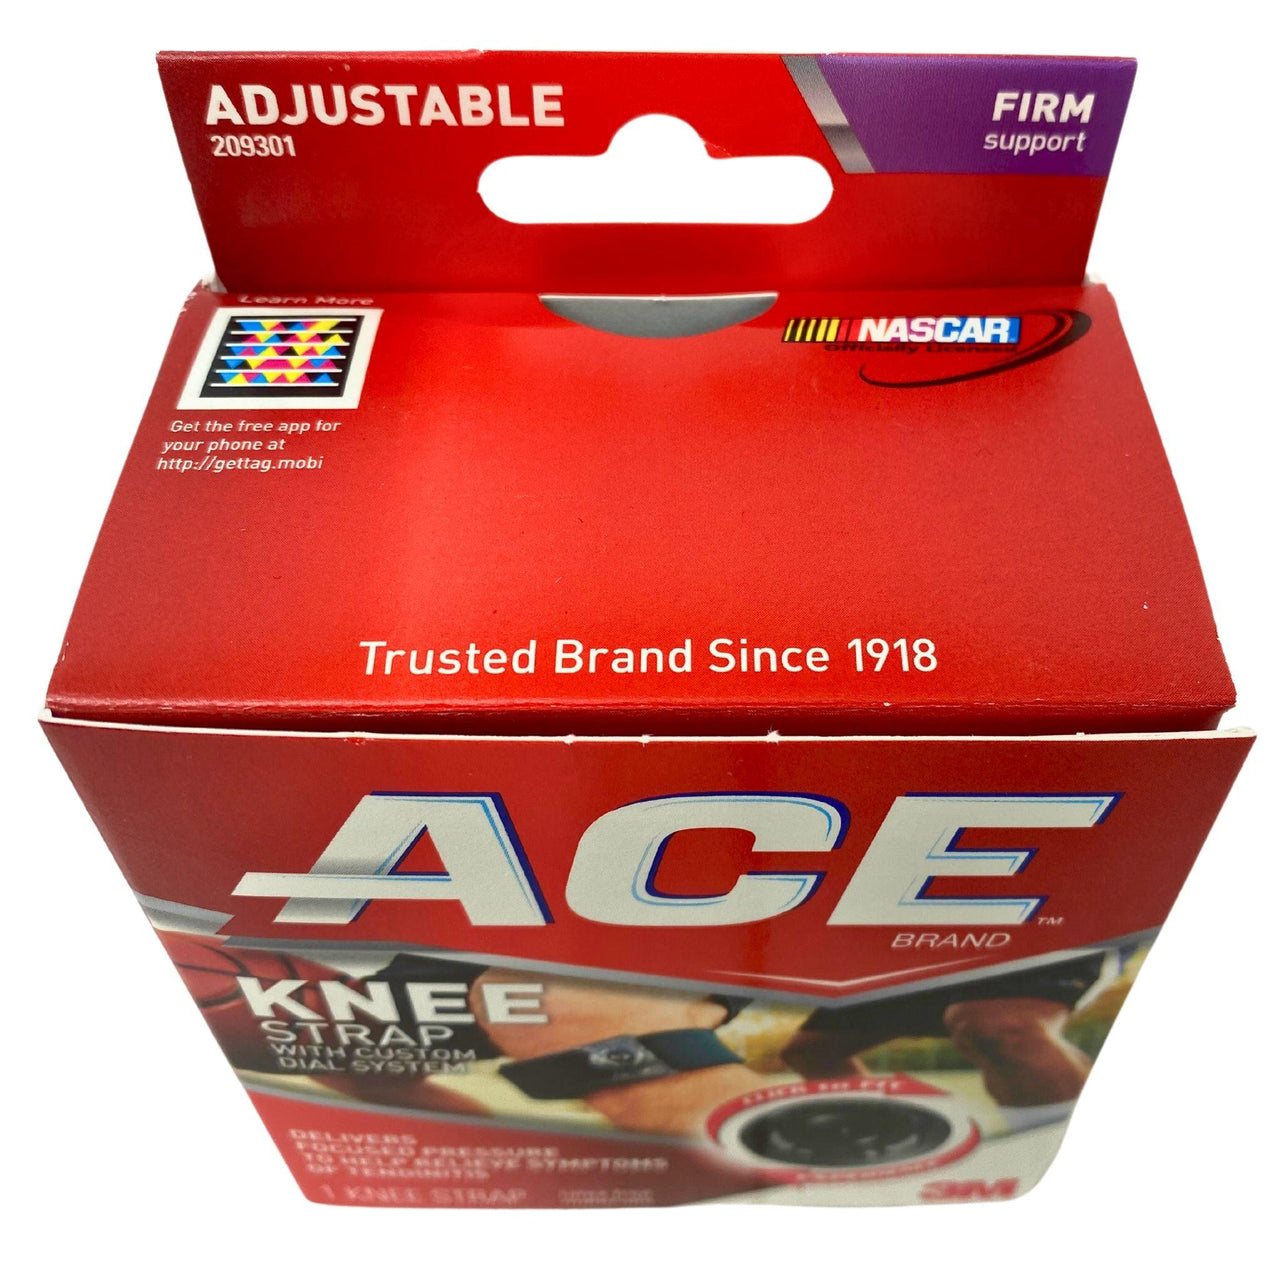 ACE Knee Strap with Custom Dial System (45 Pcs Lot) - Discount Wholesalers Inc